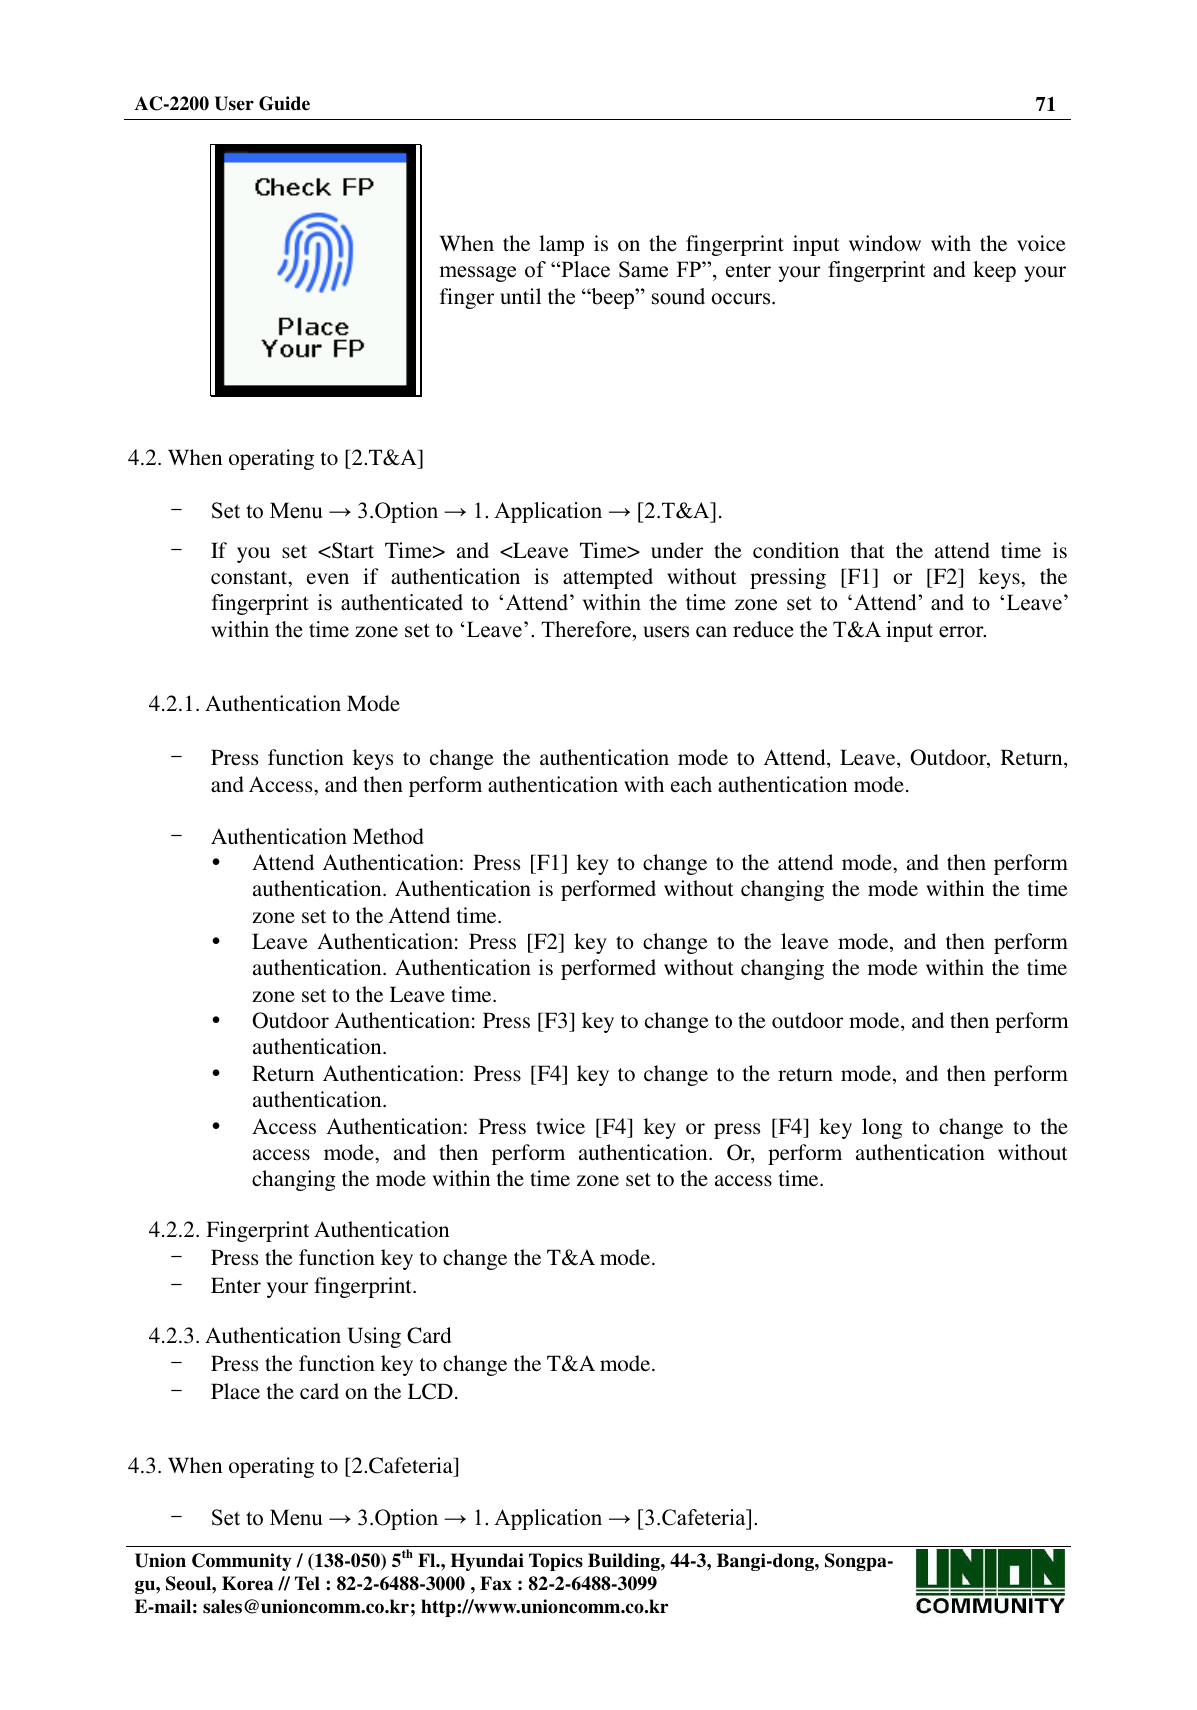  AC-2200 User Guide 71   Union Community / (138-050) 5th Fl., Hyundai Topics Building, 44-3, Bangi-dong, Songpa-gu, Seoul, Korea // Tel : 82-2-6488-3000 , Fax : 82-2-6488-3099 E-mail: sales@unioncomm.co.kr; http://www.unioncomm.co.kr    When the lamp is on the fingerprint input window with the voice message of “Place Same FP”, enter your fingerprint and keep your finger until the “beep” sound occurs.   4.2. When operating to [2.T&amp;A]  - Set to Menu → 3.Option → 1. Application → [2.T&amp;A].  - If  you  set  &lt;Start  Time&gt;  and  &lt;Leave  Time&gt;  under  the  condition  that  the  attend  time  is constant,  even  if  authentication  is  attempted  without  pressing  [F1]  or  [F2]  keys,  the fingerprint is authenticated to ‘Attend’  within  the time zone  set to ‘Attend’  and  to ‘Leave’ within the time zone set to ‘Leave’. Therefore, users can reduce the T&amp;A input error.   4.2.1. Authentication Mode  - Press function keys to change the authentication mode to Attend, Leave, Outdoor, Return, and Access, and then perform authentication with each authentication mode.  - Authentication Method  Attend Authentication: Press [F1] key to change to the attend mode, and then perform authentication. Authentication is performed without changing the mode within the time zone set to the Attend time.  Leave Authentication: Press [F2] key to change to  the leave mode, and then perform authentication. Authentication is performed without changing the mode within the time zone set to the Leave time.  Outdoor Authentication: Press [F3] key to change to the outdoor mode, and then perform authentication.  Return Authentication: Press [F4] key to change to the return mode, and then perform authentication.  Access  Authentication:  Press  twice [F4]  key or  press  [F4]  key  long  to  change to  the access  mode,  and  then  perform  authentication.  Or,  perform  authentication  without changing the mode within the time zone set to the access time.  4.2.2. Fingerprint Authentication - Press the function key to change the T&amp;A mode. - Enter your fingerprint.  4.2.3. Authentication Using Card - Press the function key to change the T&amp;A mode. - Place the card on the LCD.   4.3. When operating to [2.Cafeteria]  - Set to Menu → 3.Option → 1. Application → [3.Cafeteria]. 